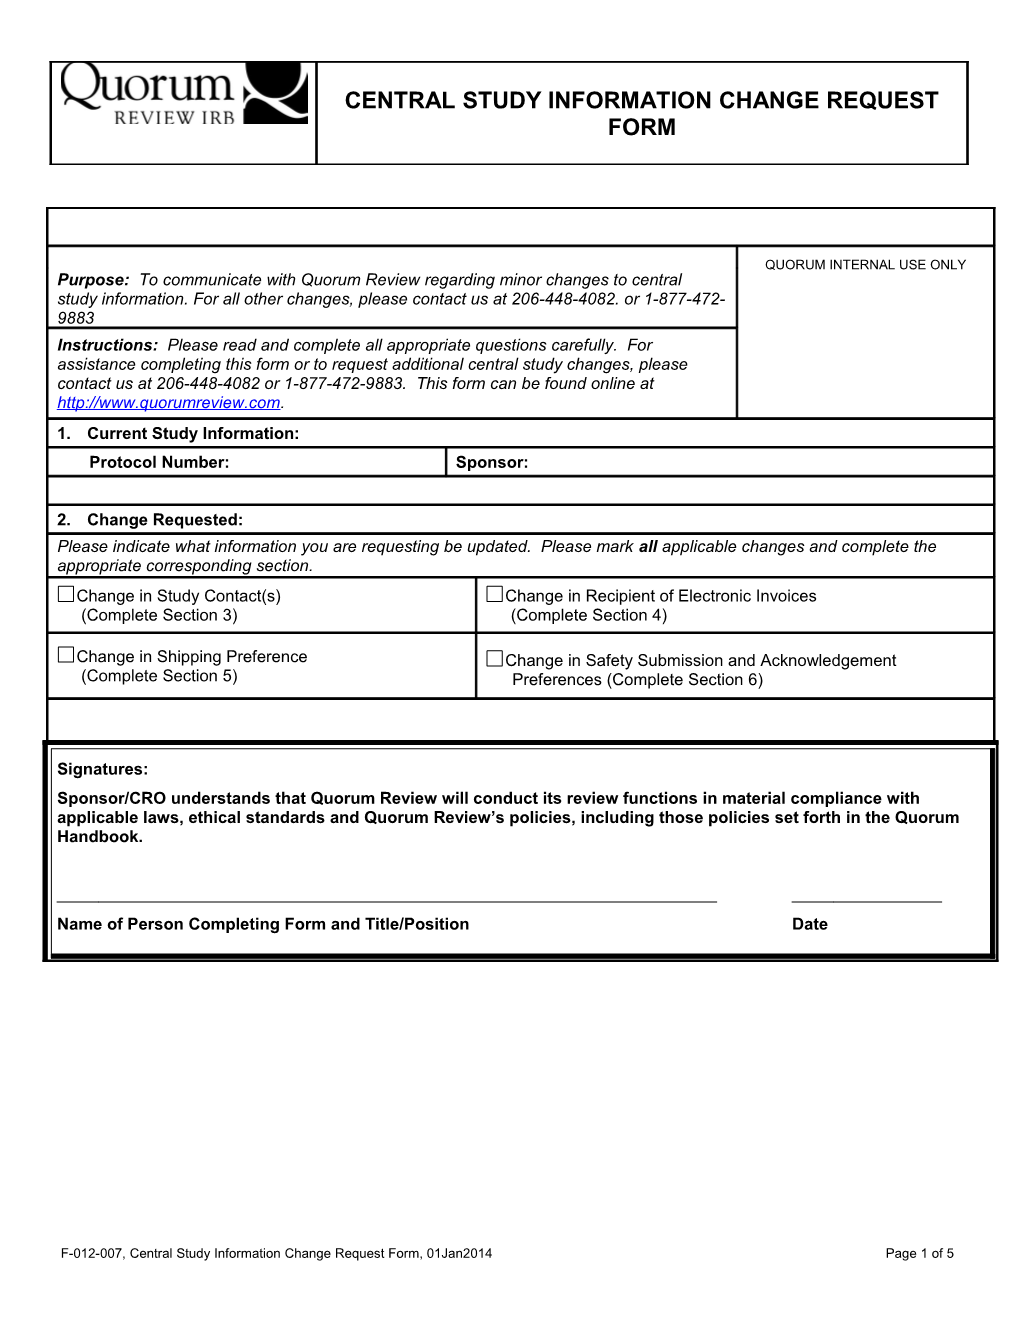 Central Study Information Change Request Form